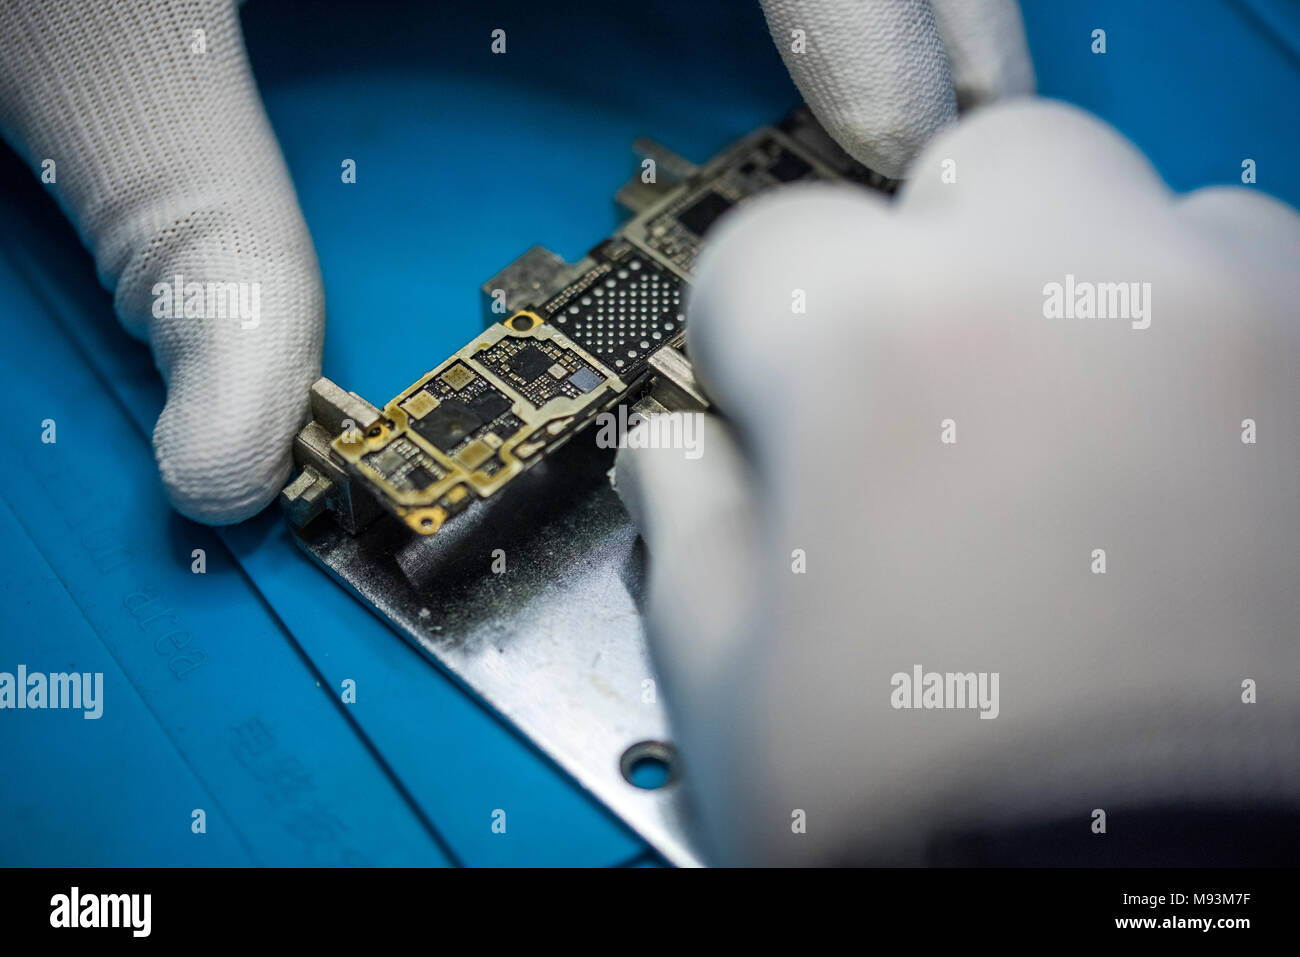 Reparing electronics devices, chips, motherboards, welding. Circuit. Stock Photo